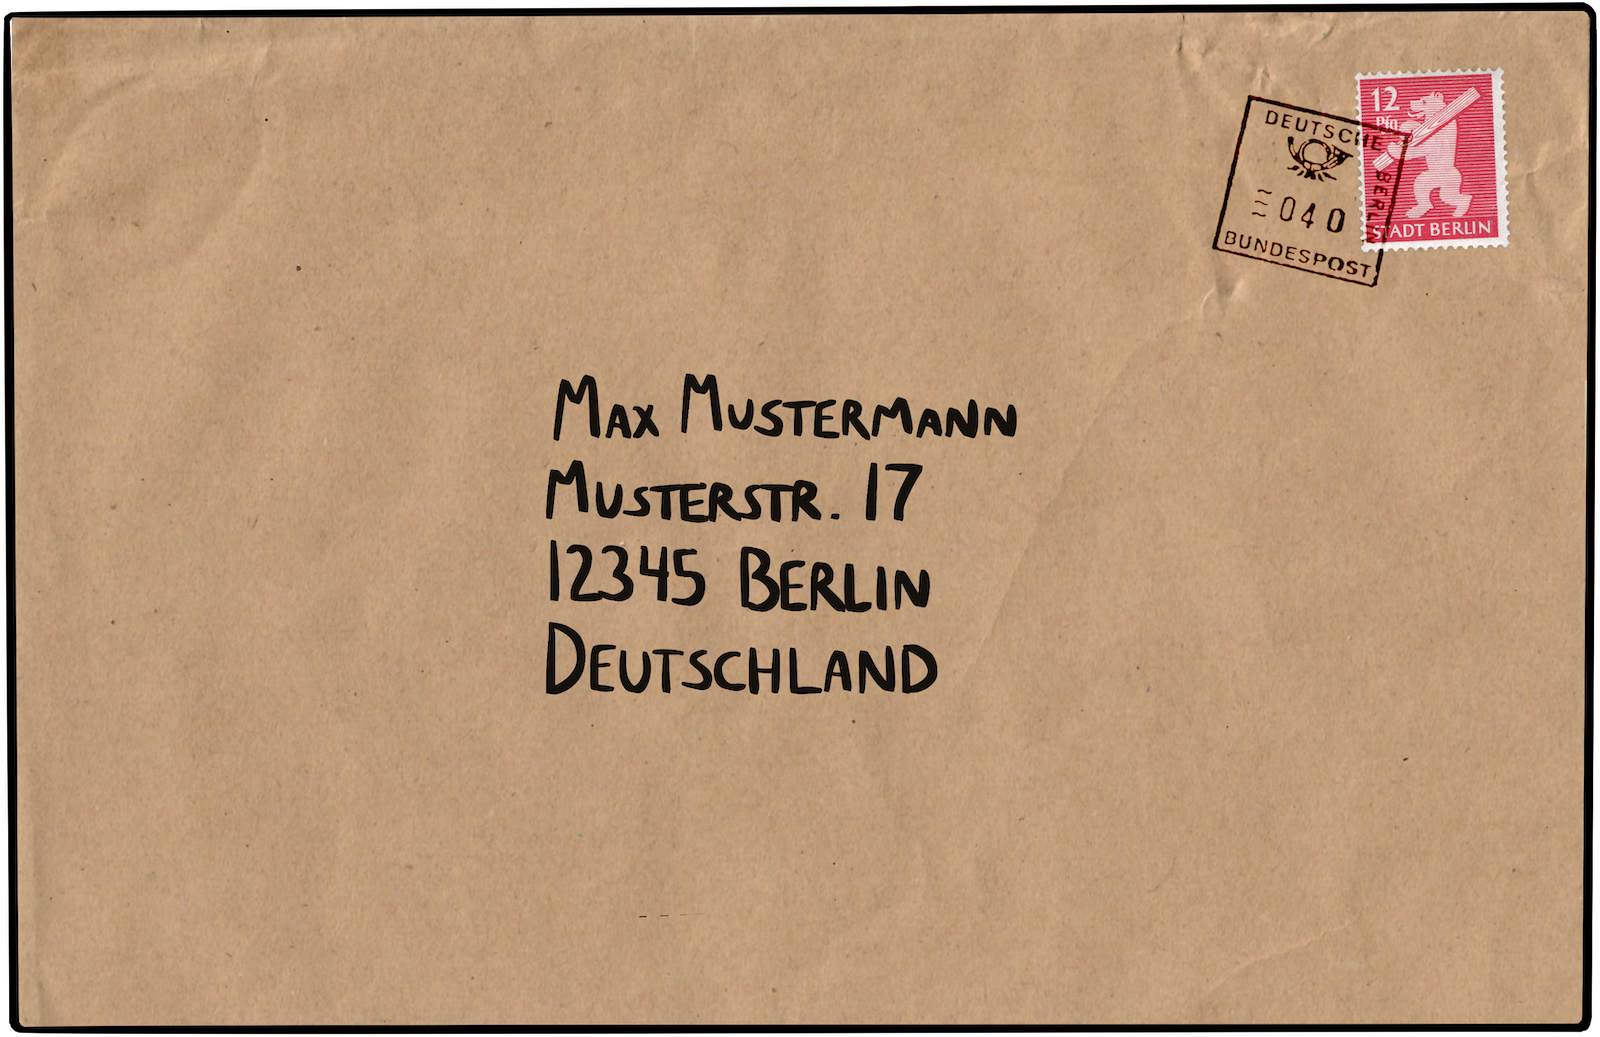 how to write the address on an envelope in germany